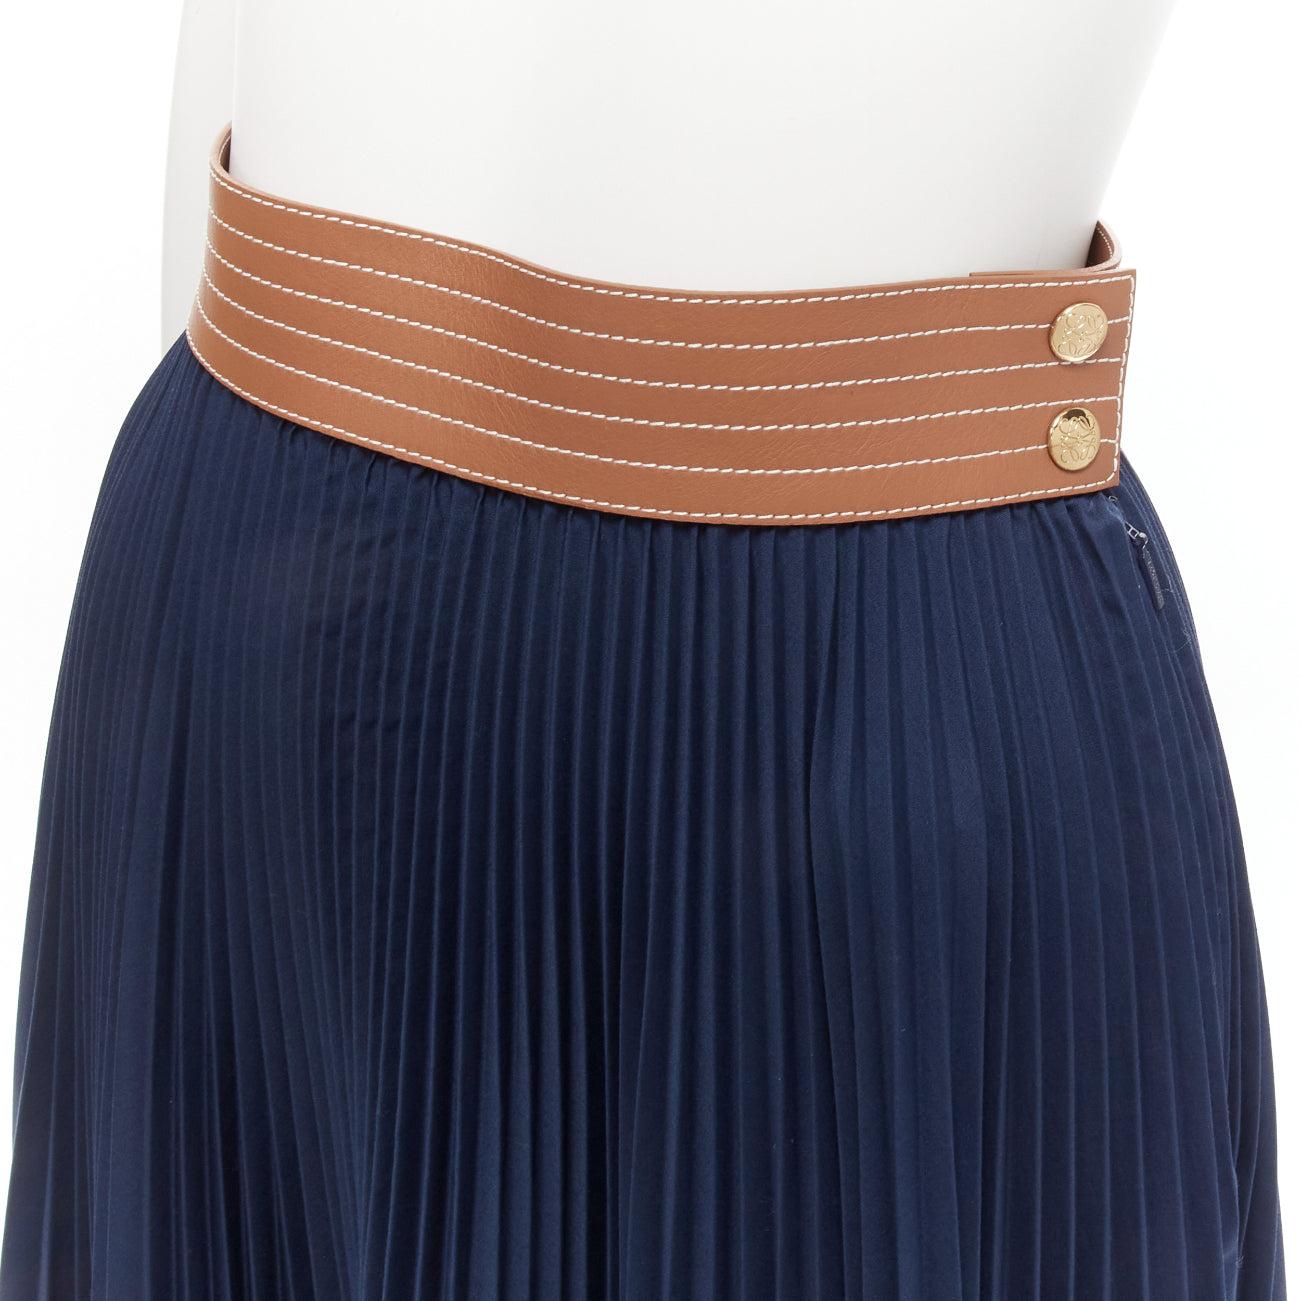 LOEWE brown cowhide leather white topstitched belt navy pleated midi skirt FR34 XS
Reference: LNKO/A02217
Brand: Loewe
Designer: JW Anderson
Material: Leather, Fabric
Color: Brown, Navy
Pattern: Solid
Closure: Snap Buttons
Extra Details: Snap button